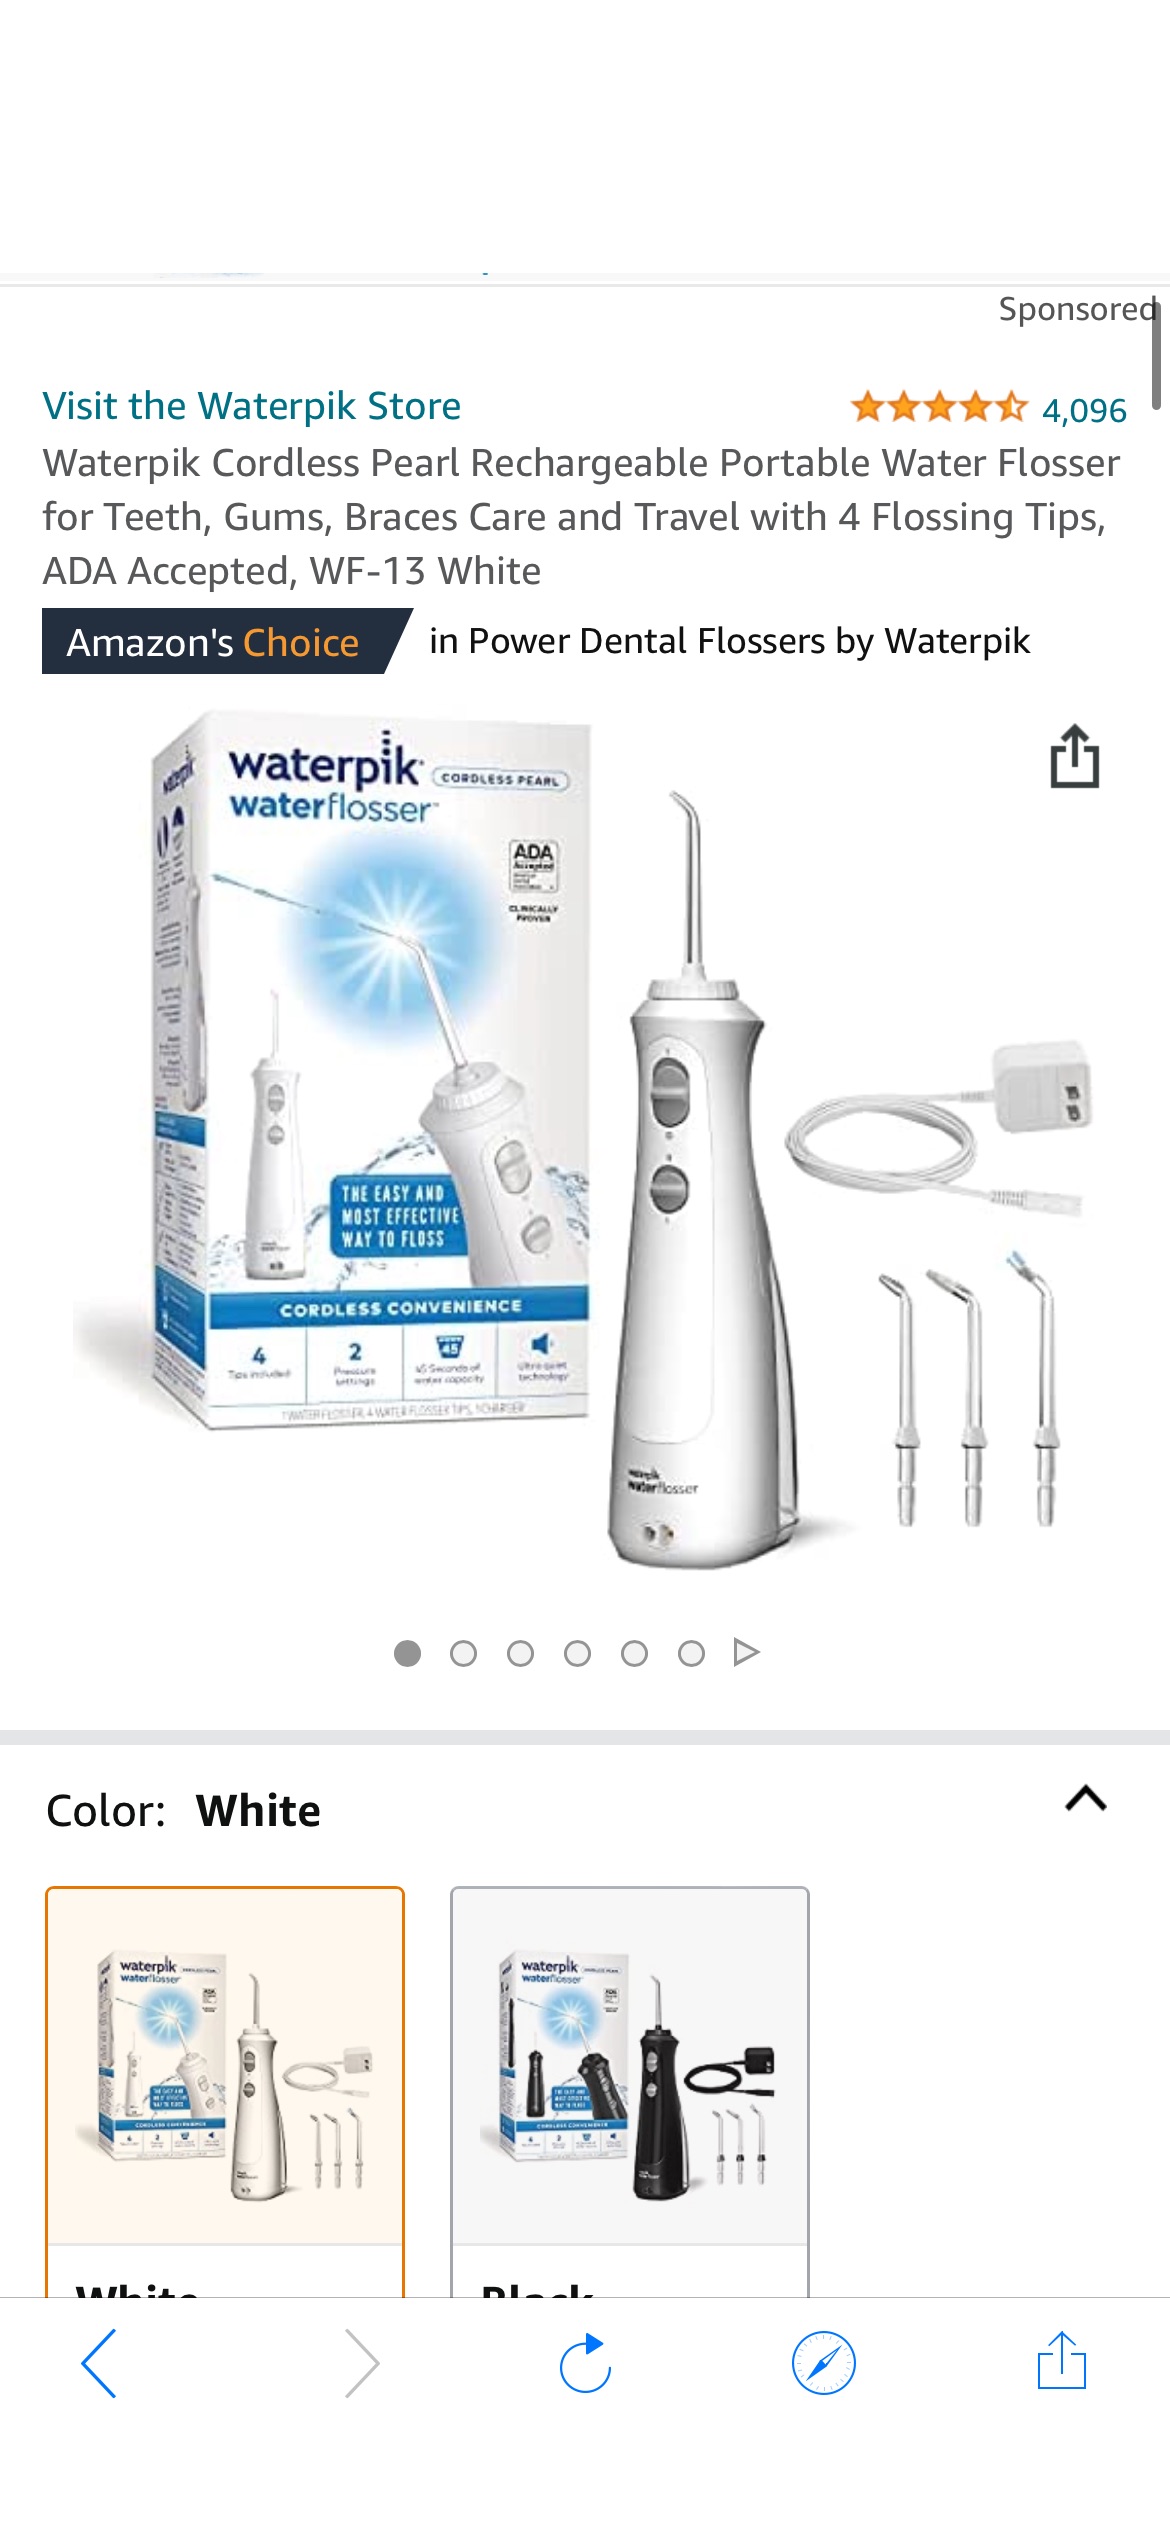 Amazon.com: Waterpik Cordless Pearl Rechargeable Portable Water Flosser for Teeth, Gums, Braces Care and Travel with 4 Flossing Tips, ADA Accepted, WF-13 White : Everything Else